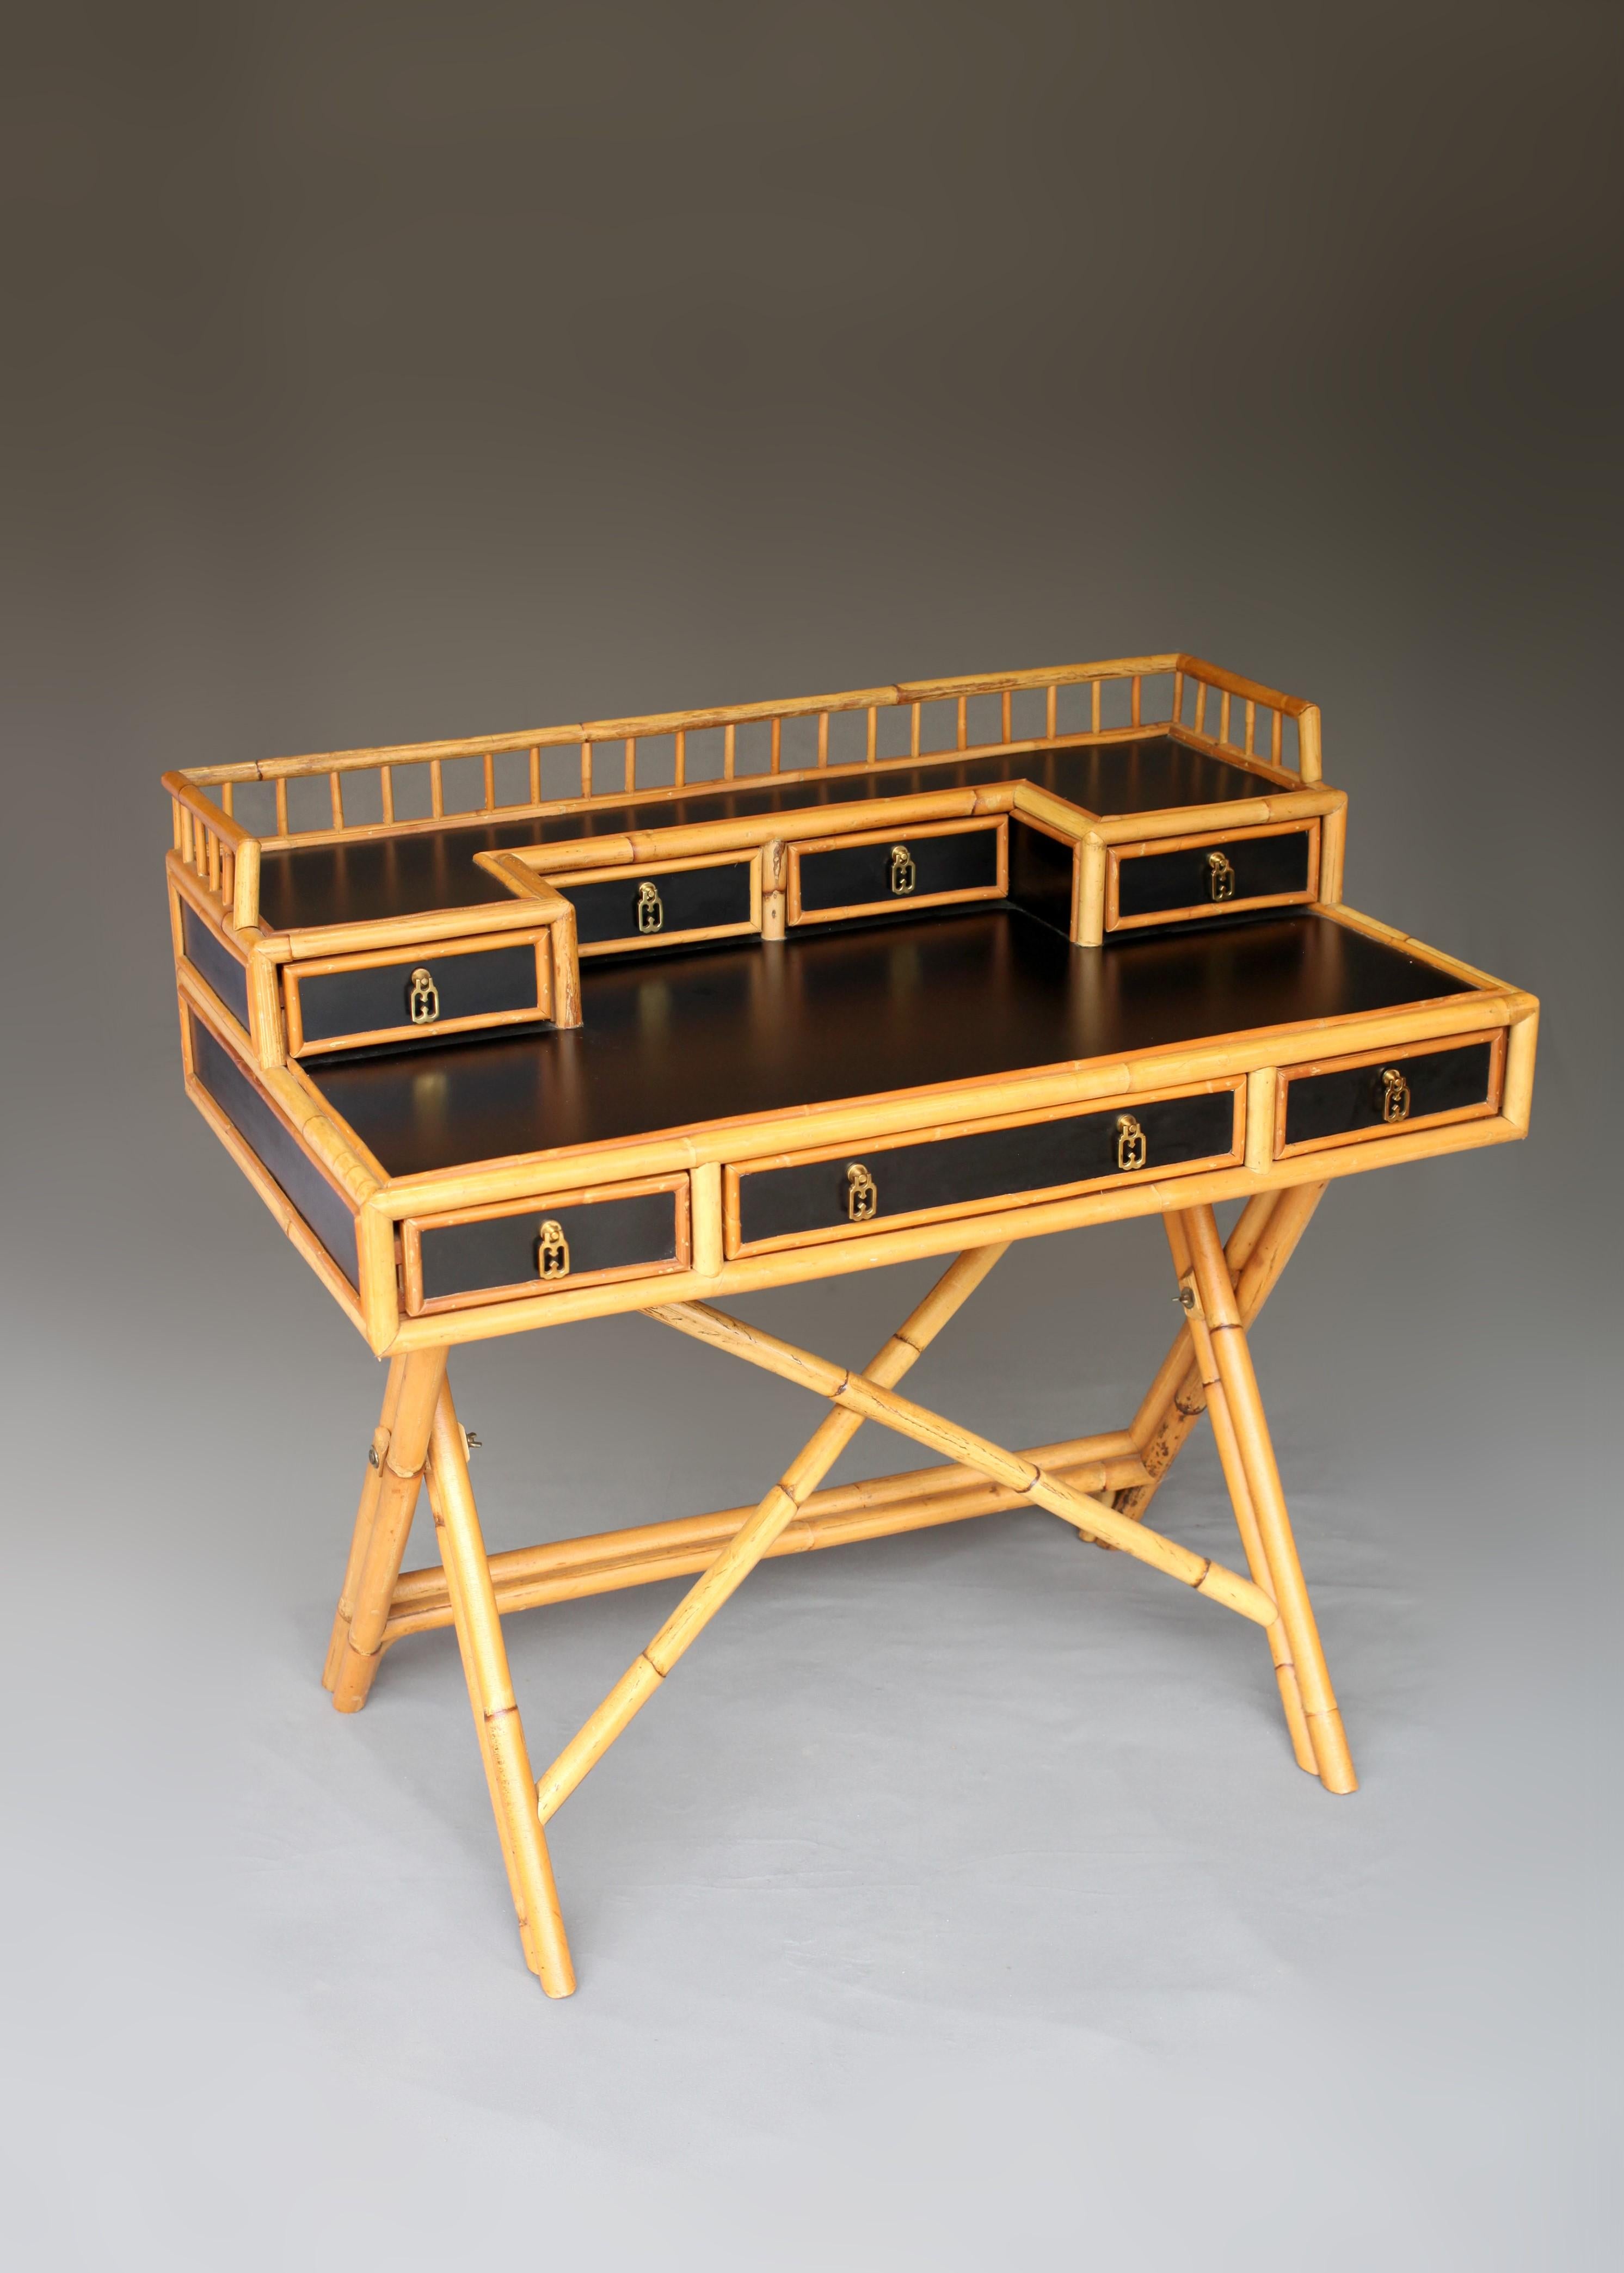 East meets West, Bamboo meets Lacquer. Add a generous helping of mid-century charm to your surroundings with this Bamboo & Lacquer Campaign Desk by Murio. Serve your workspace needs with this delightful piece that perfectly balances practicality